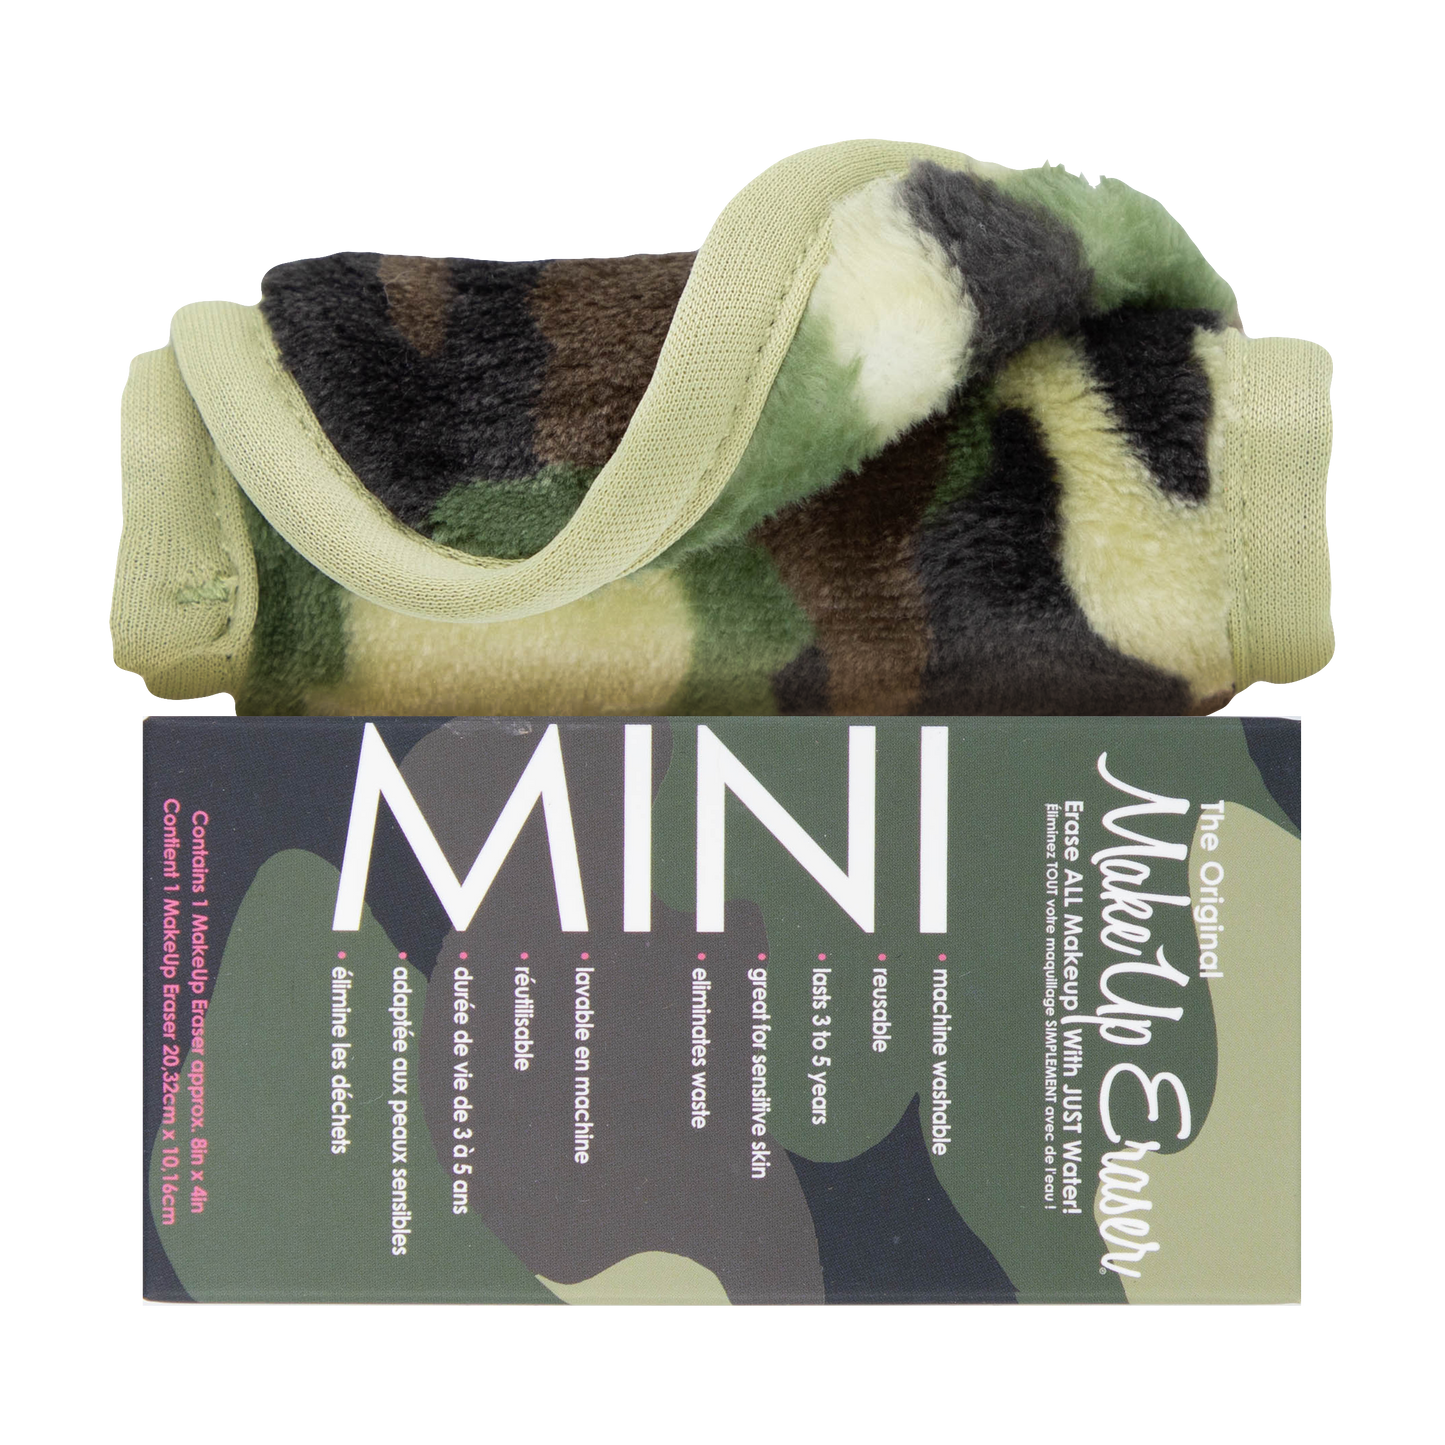 Rolled up Mini Camo MakeUp Eraser cloth on top of packaging.